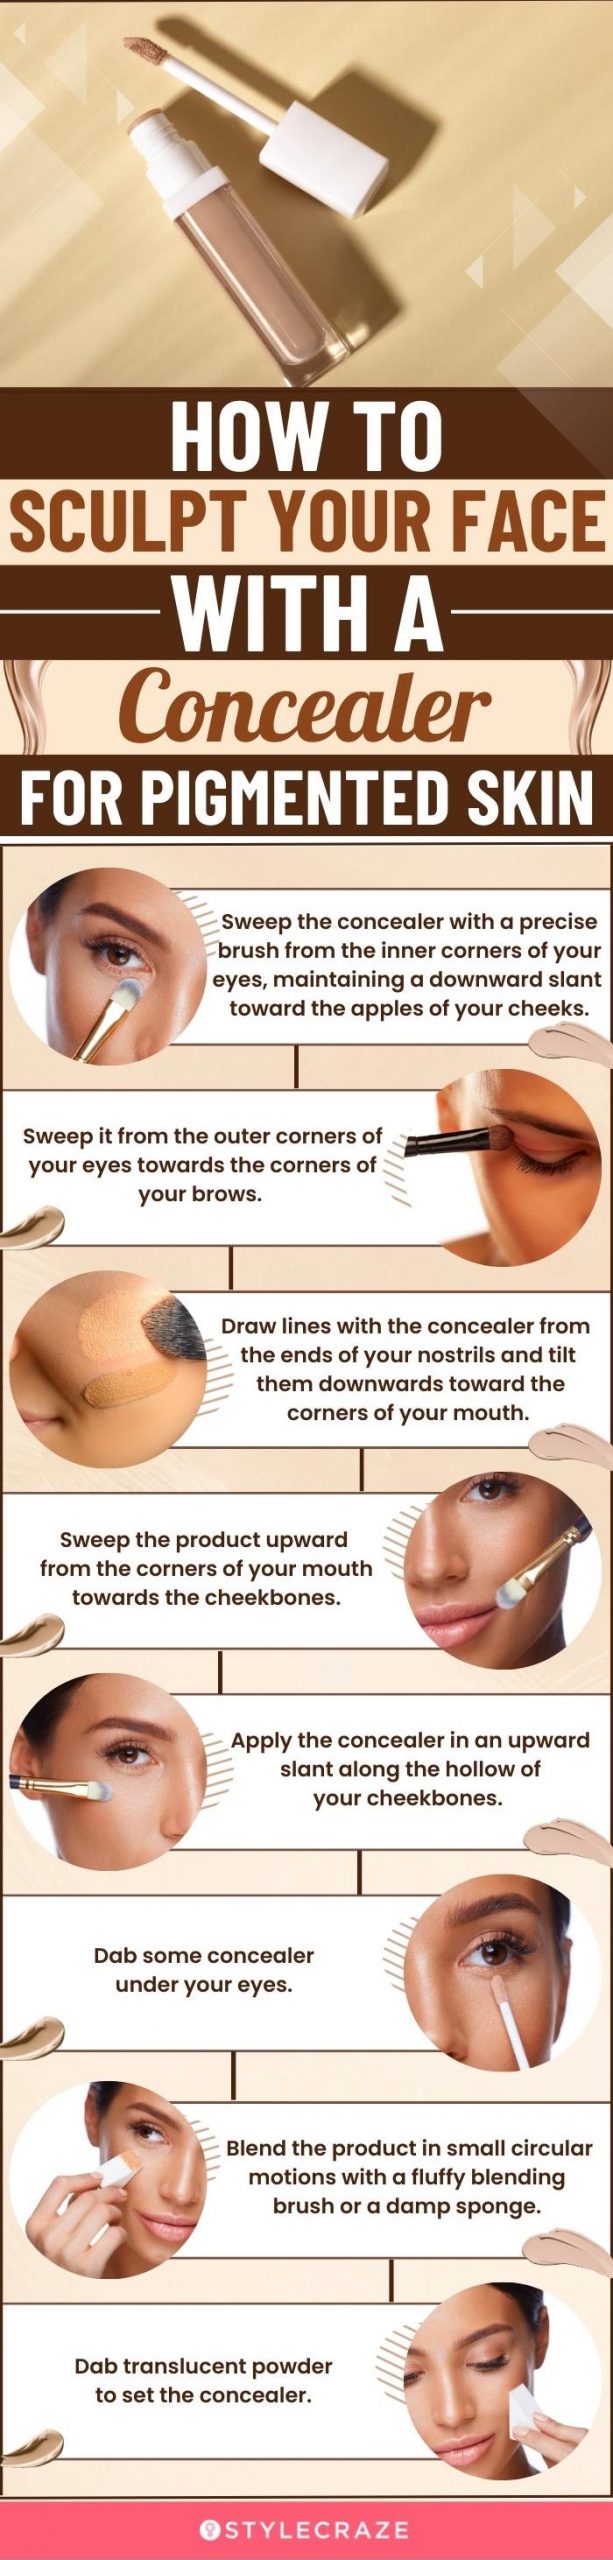 How To Sculpt Your Face With A Concealer For Pigmented Skin (infographic)